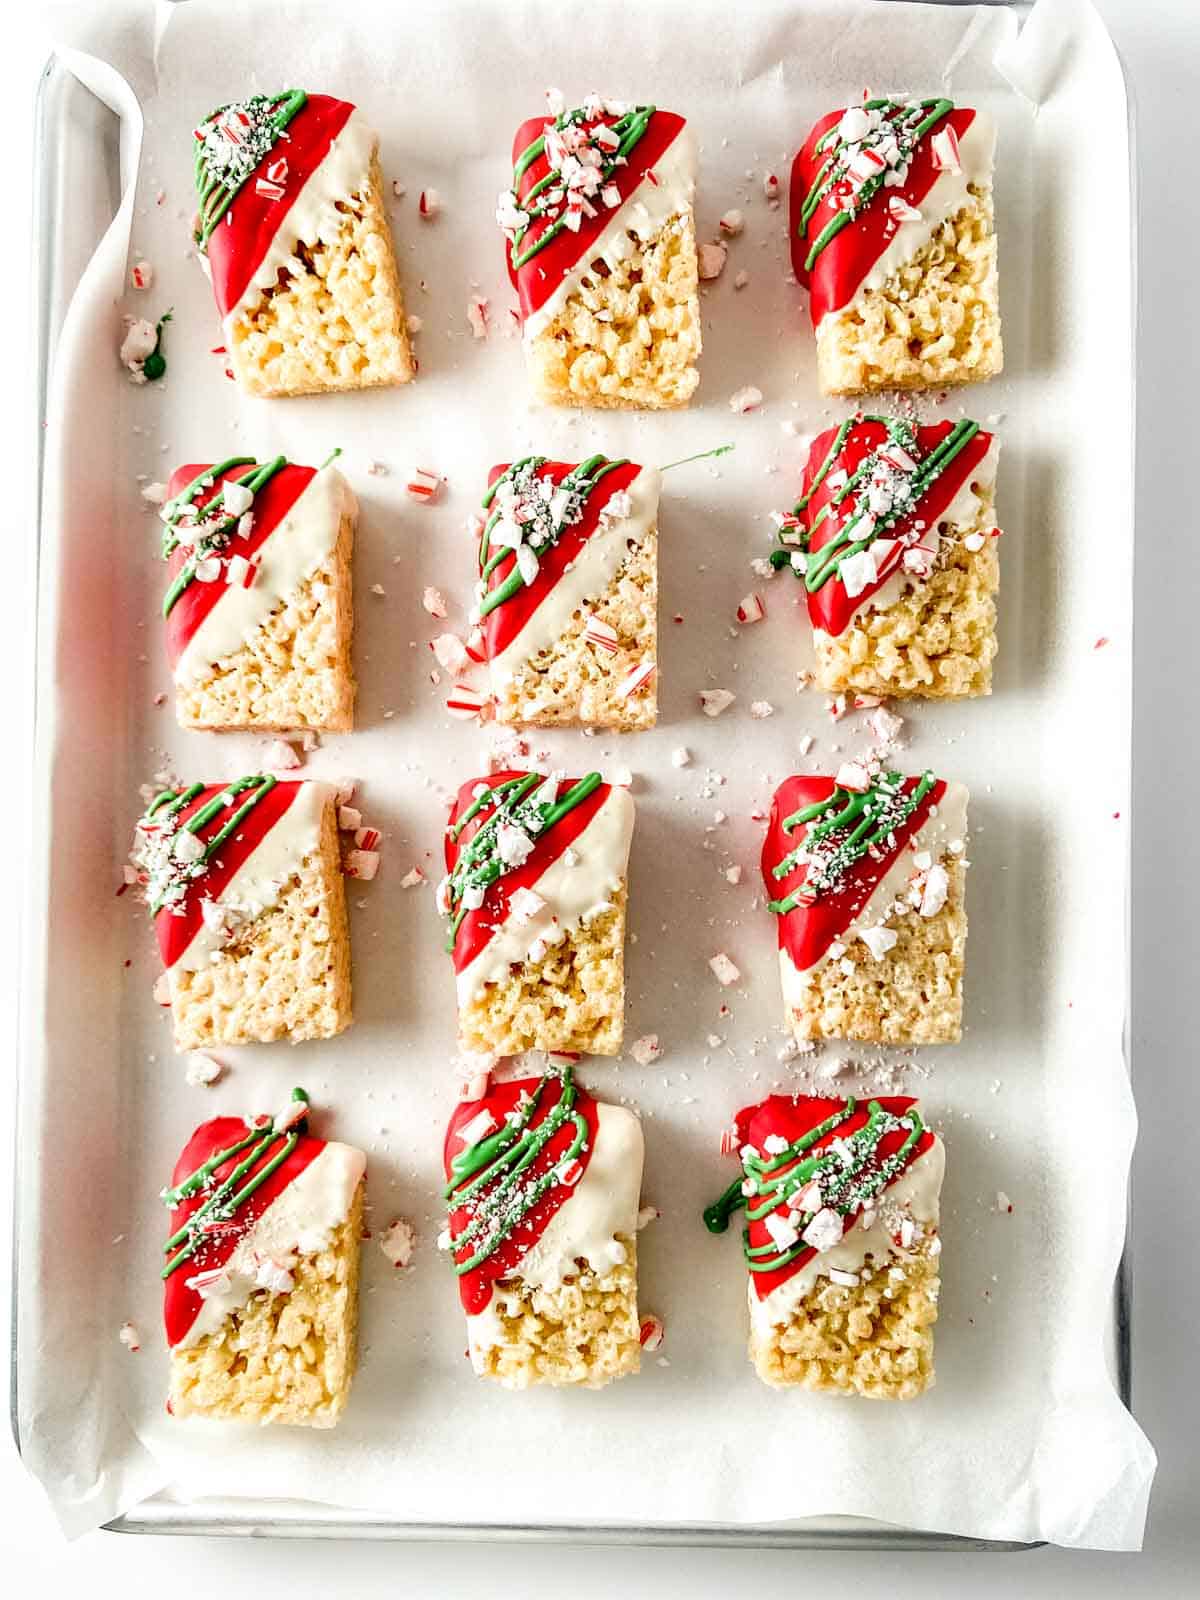 Rice cereal treats decorated with red and green on a baking sheet.